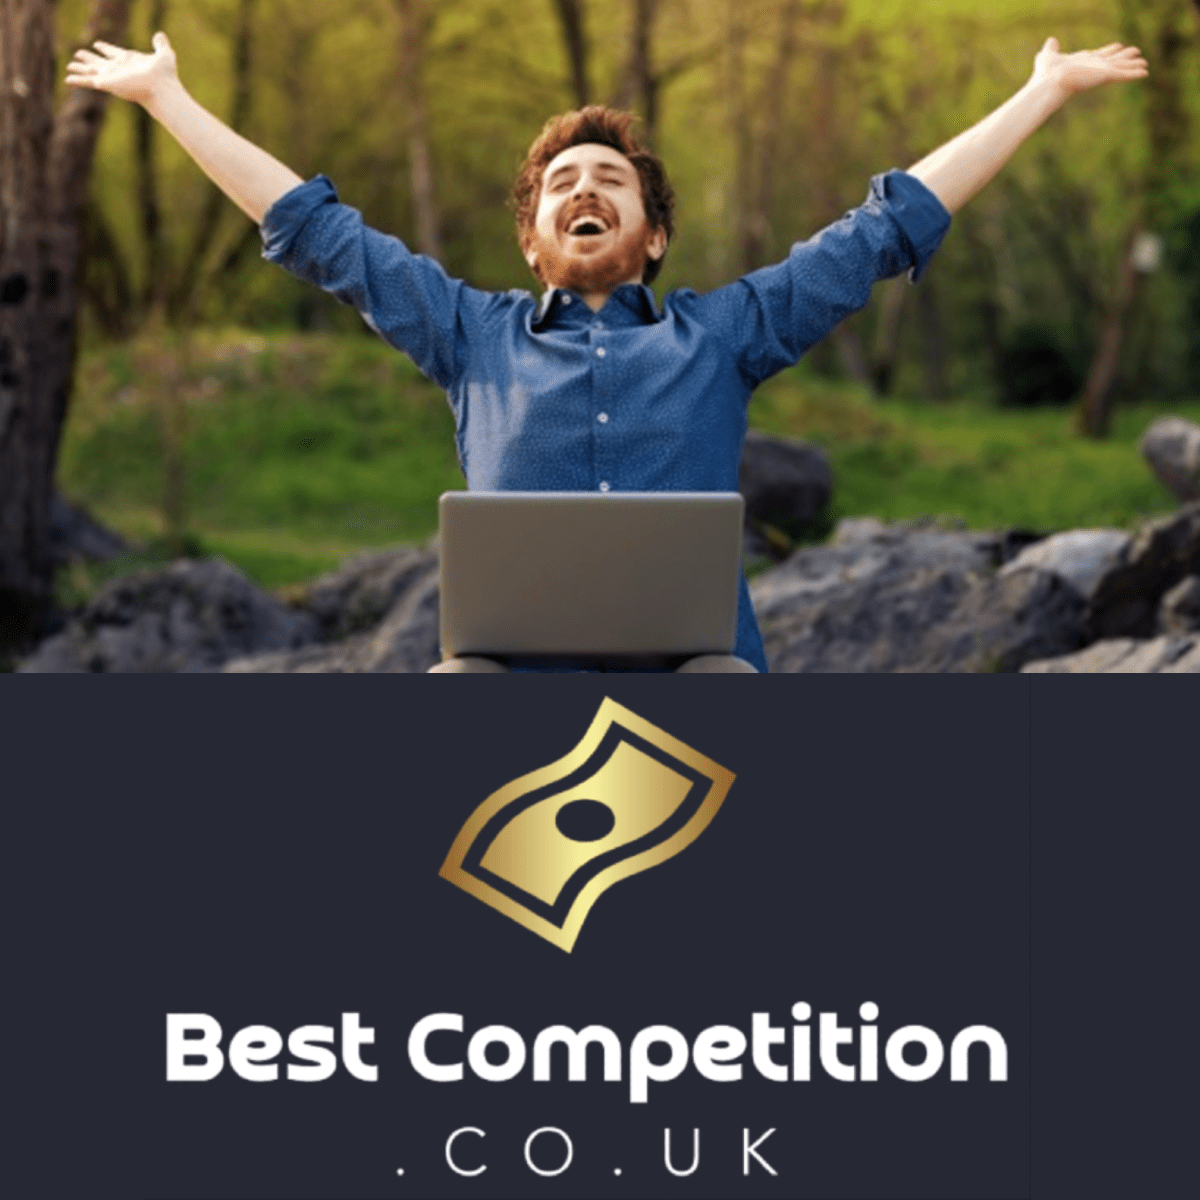 Best UK Competition to Win £500, Fast & Simple 2 Ticket Prize Draw | £315 Entry Fee